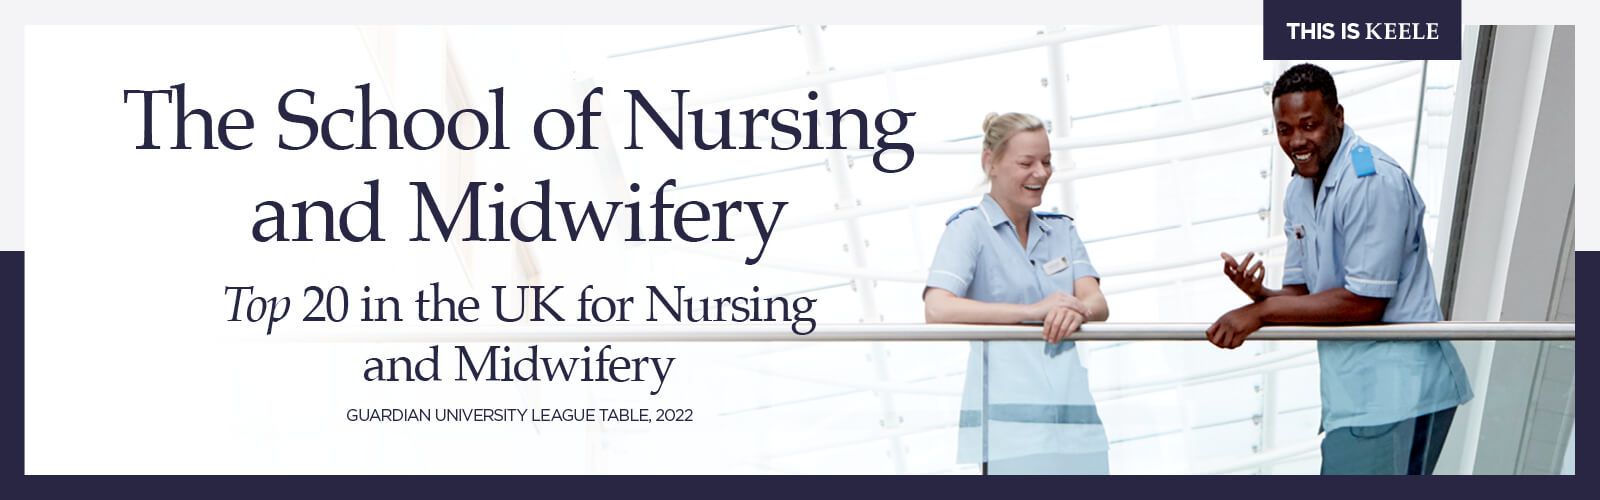 Nursing and midwifery banner